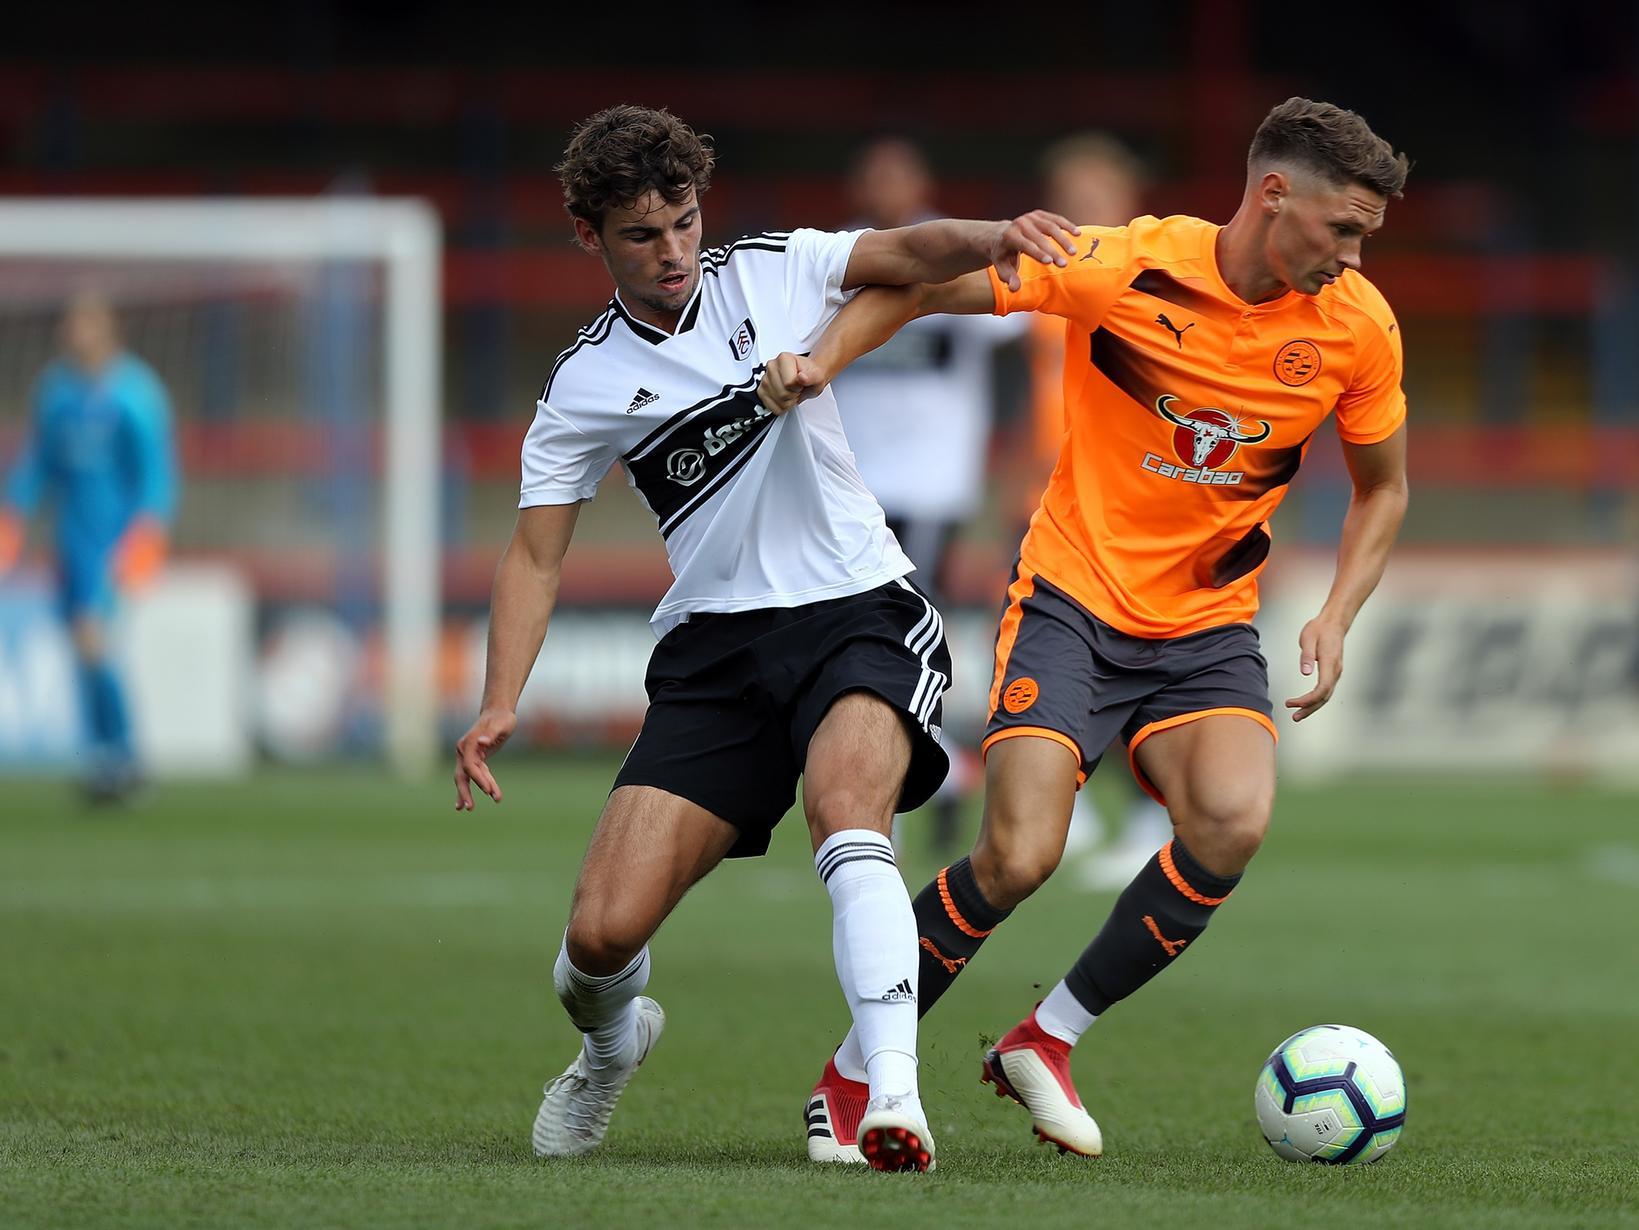 Belgian side KRC Genk are stepping up their efforts to sign Fulham's highly-rated midfielder Matt O'Riley, who has also been scouted by the likes of RB Leipzig and Borussia Dortmund. (Sky Sports News)